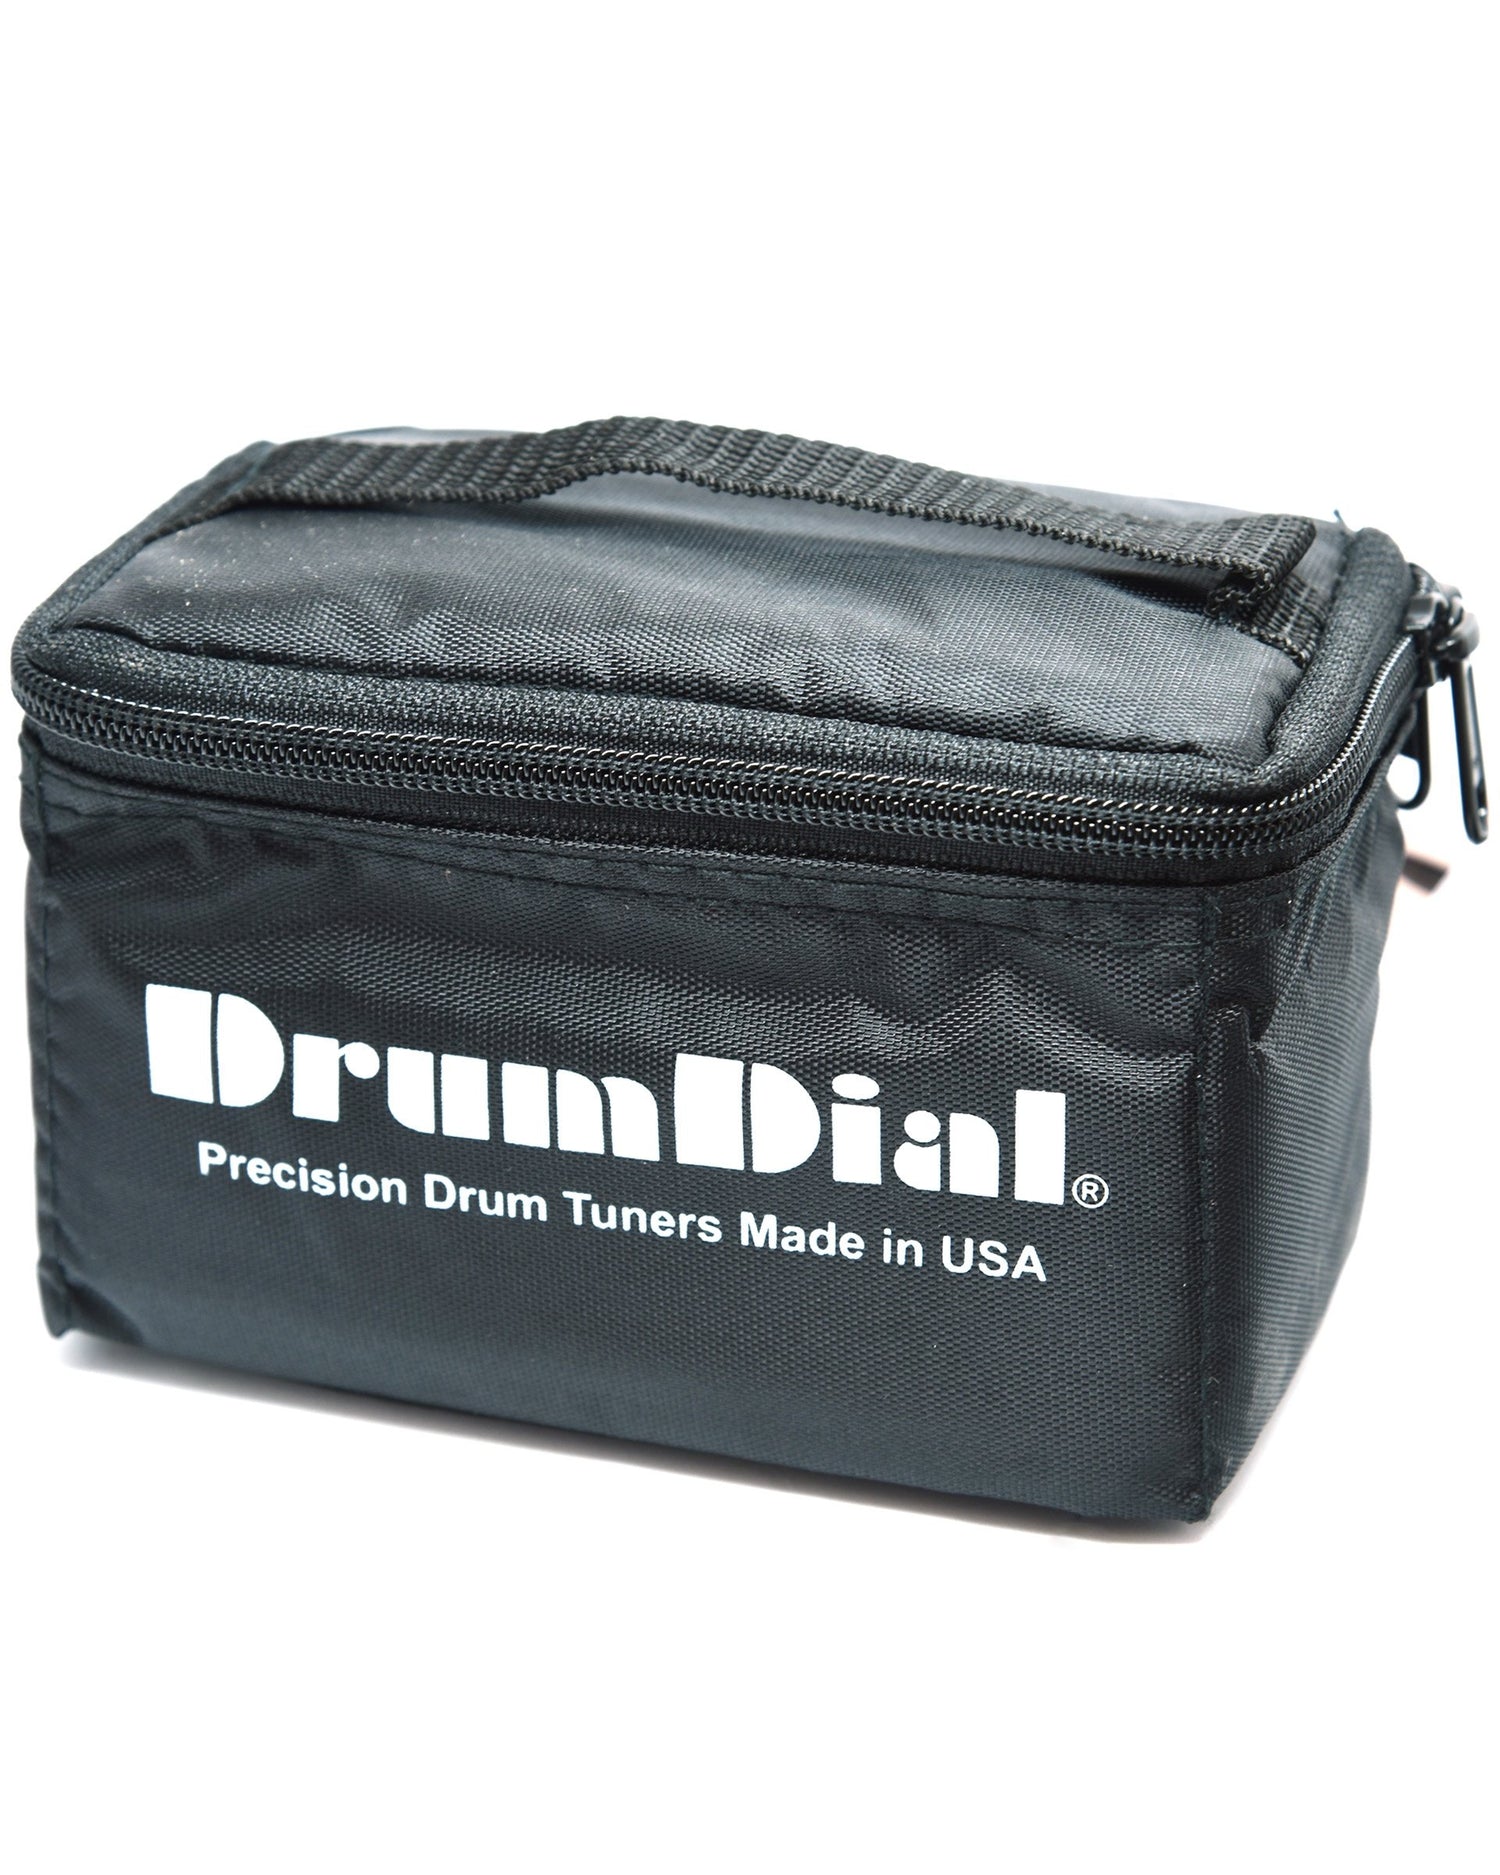 Image 1 of Drum Dial Carrying Bag - SKU# DDBAG : Product Type Accessories & Parts : Elderly Instruments